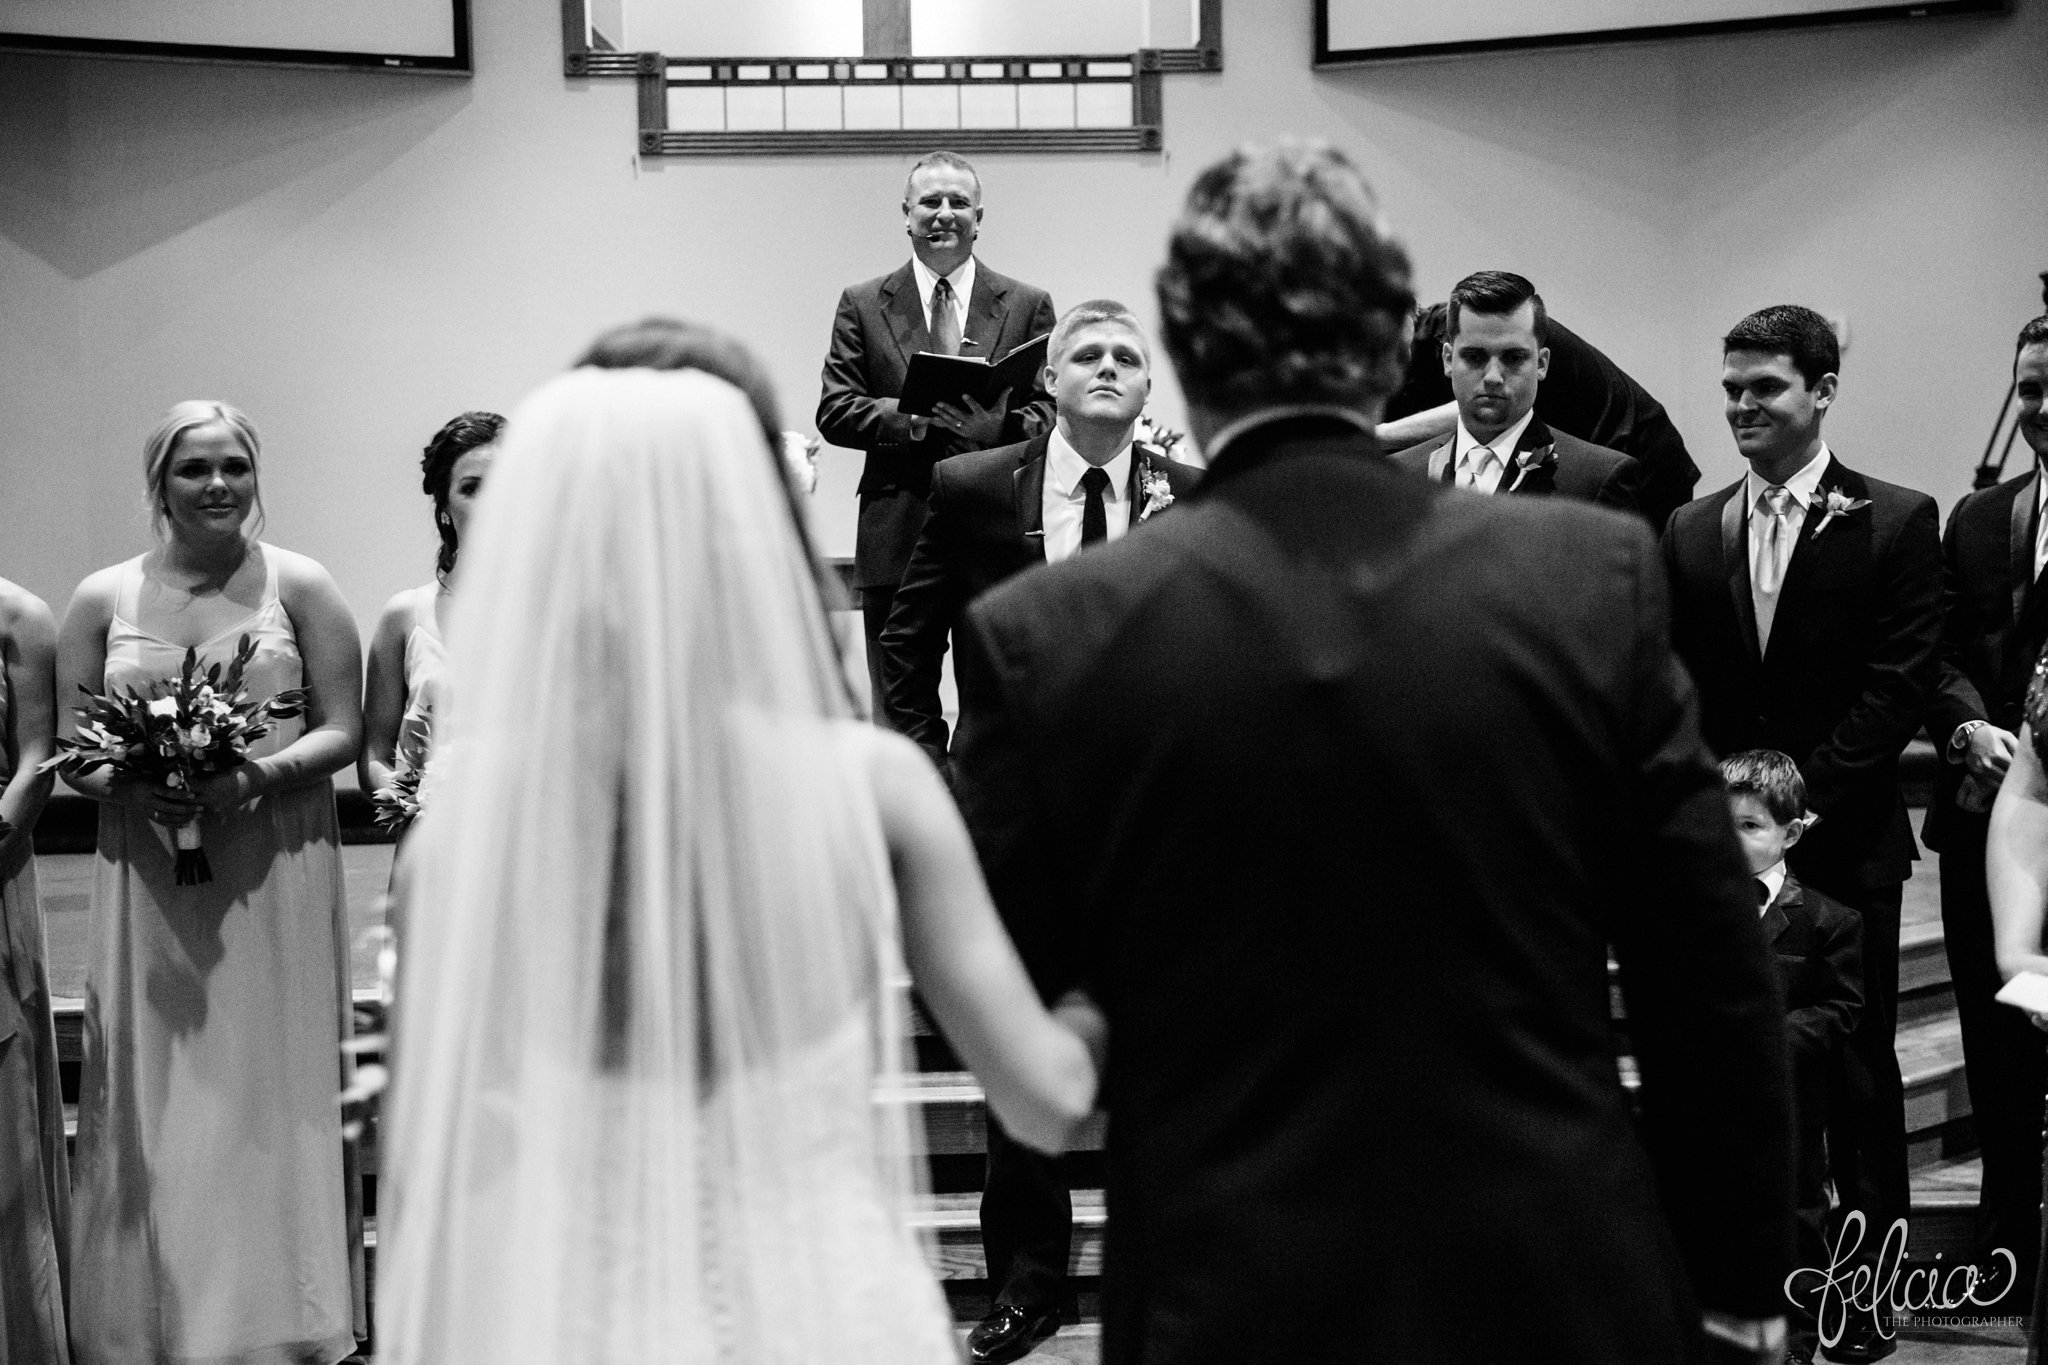 black and white | wedding | wedding photos | industrial | Rumely Event Space | wedding photography | images by feliciathephotographer.com | West Bottoms | wedding ceremony | The Providence Baptist Church | bride arrival | here comes the bride | father of the bride | walking down the aisle | groom reaction